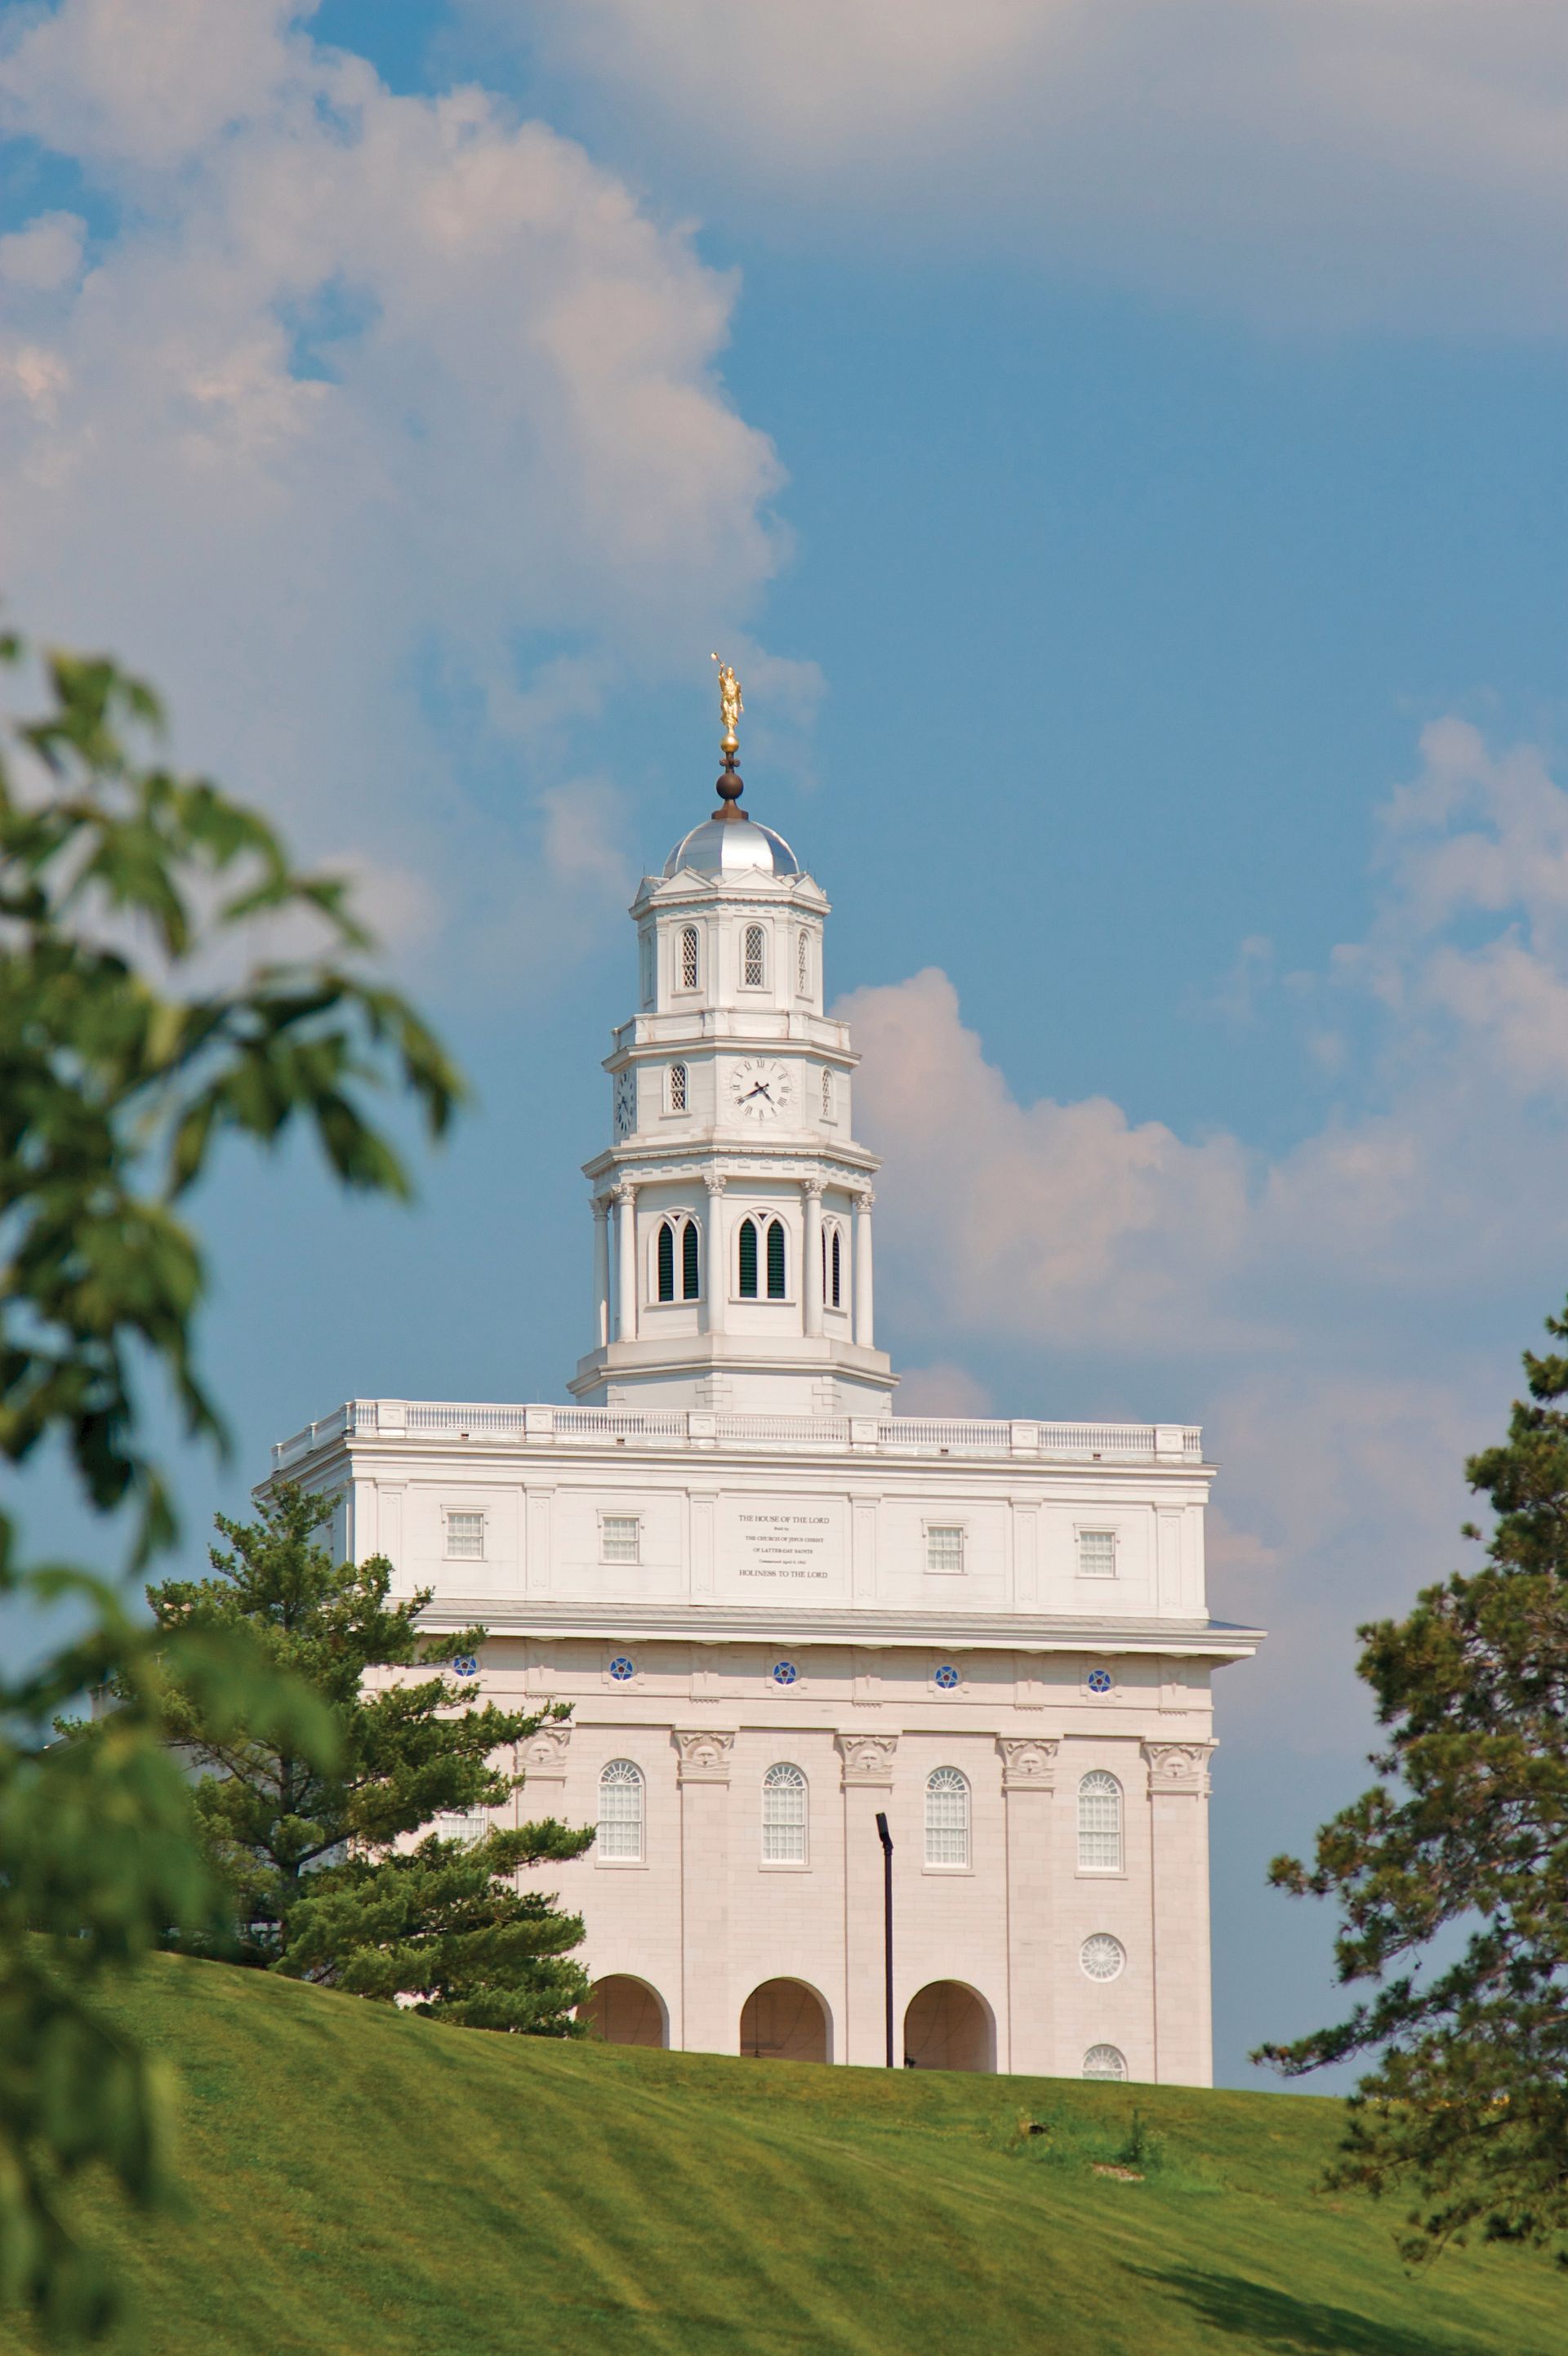 The Nauvoo Illinois Temple, including scenery.